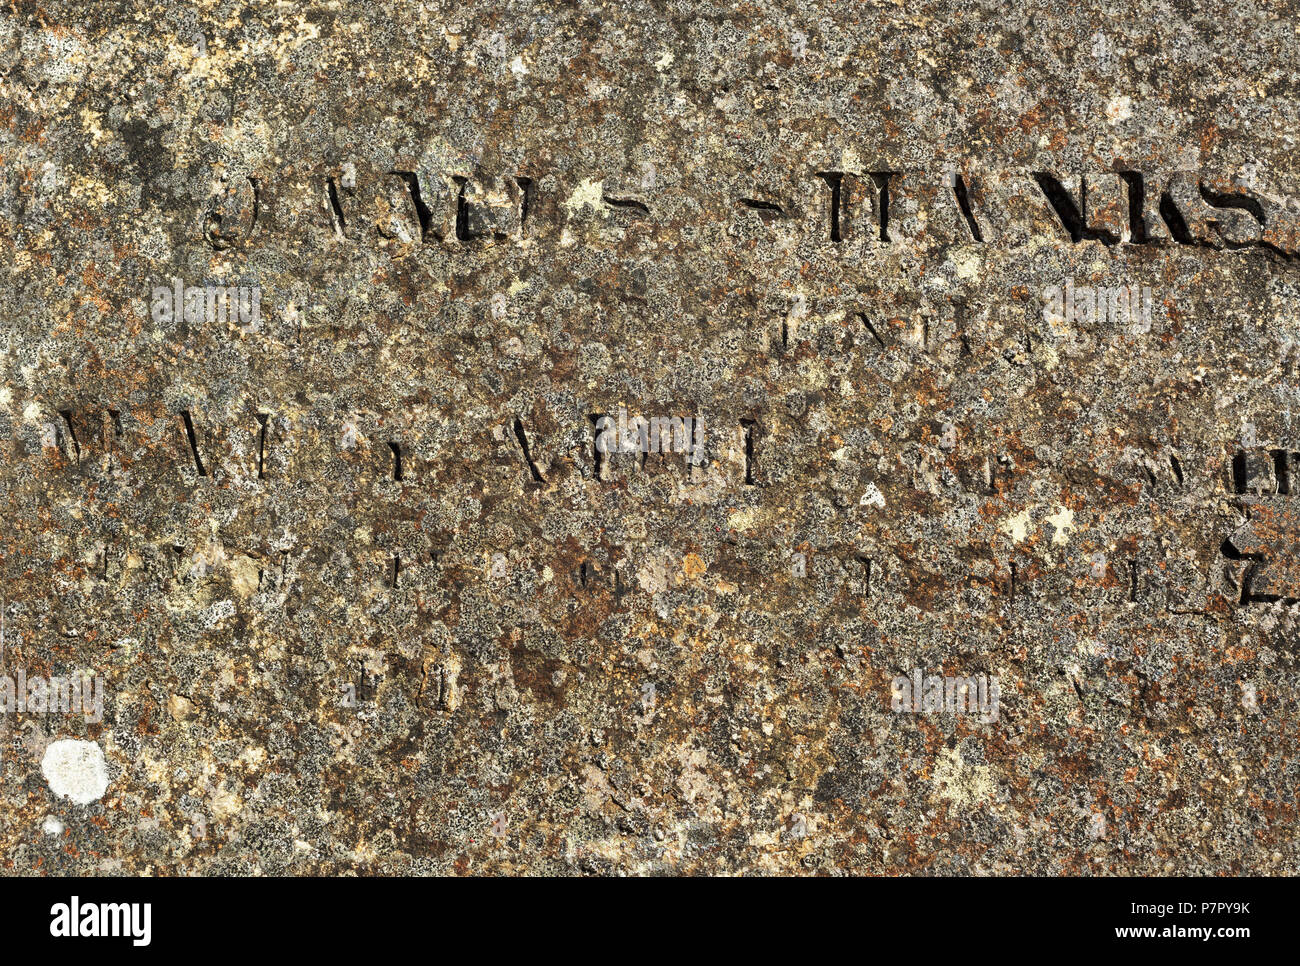 Old stone surface with partly readable engraved Latin letters covered with multi-coloured lichen Stock Photo